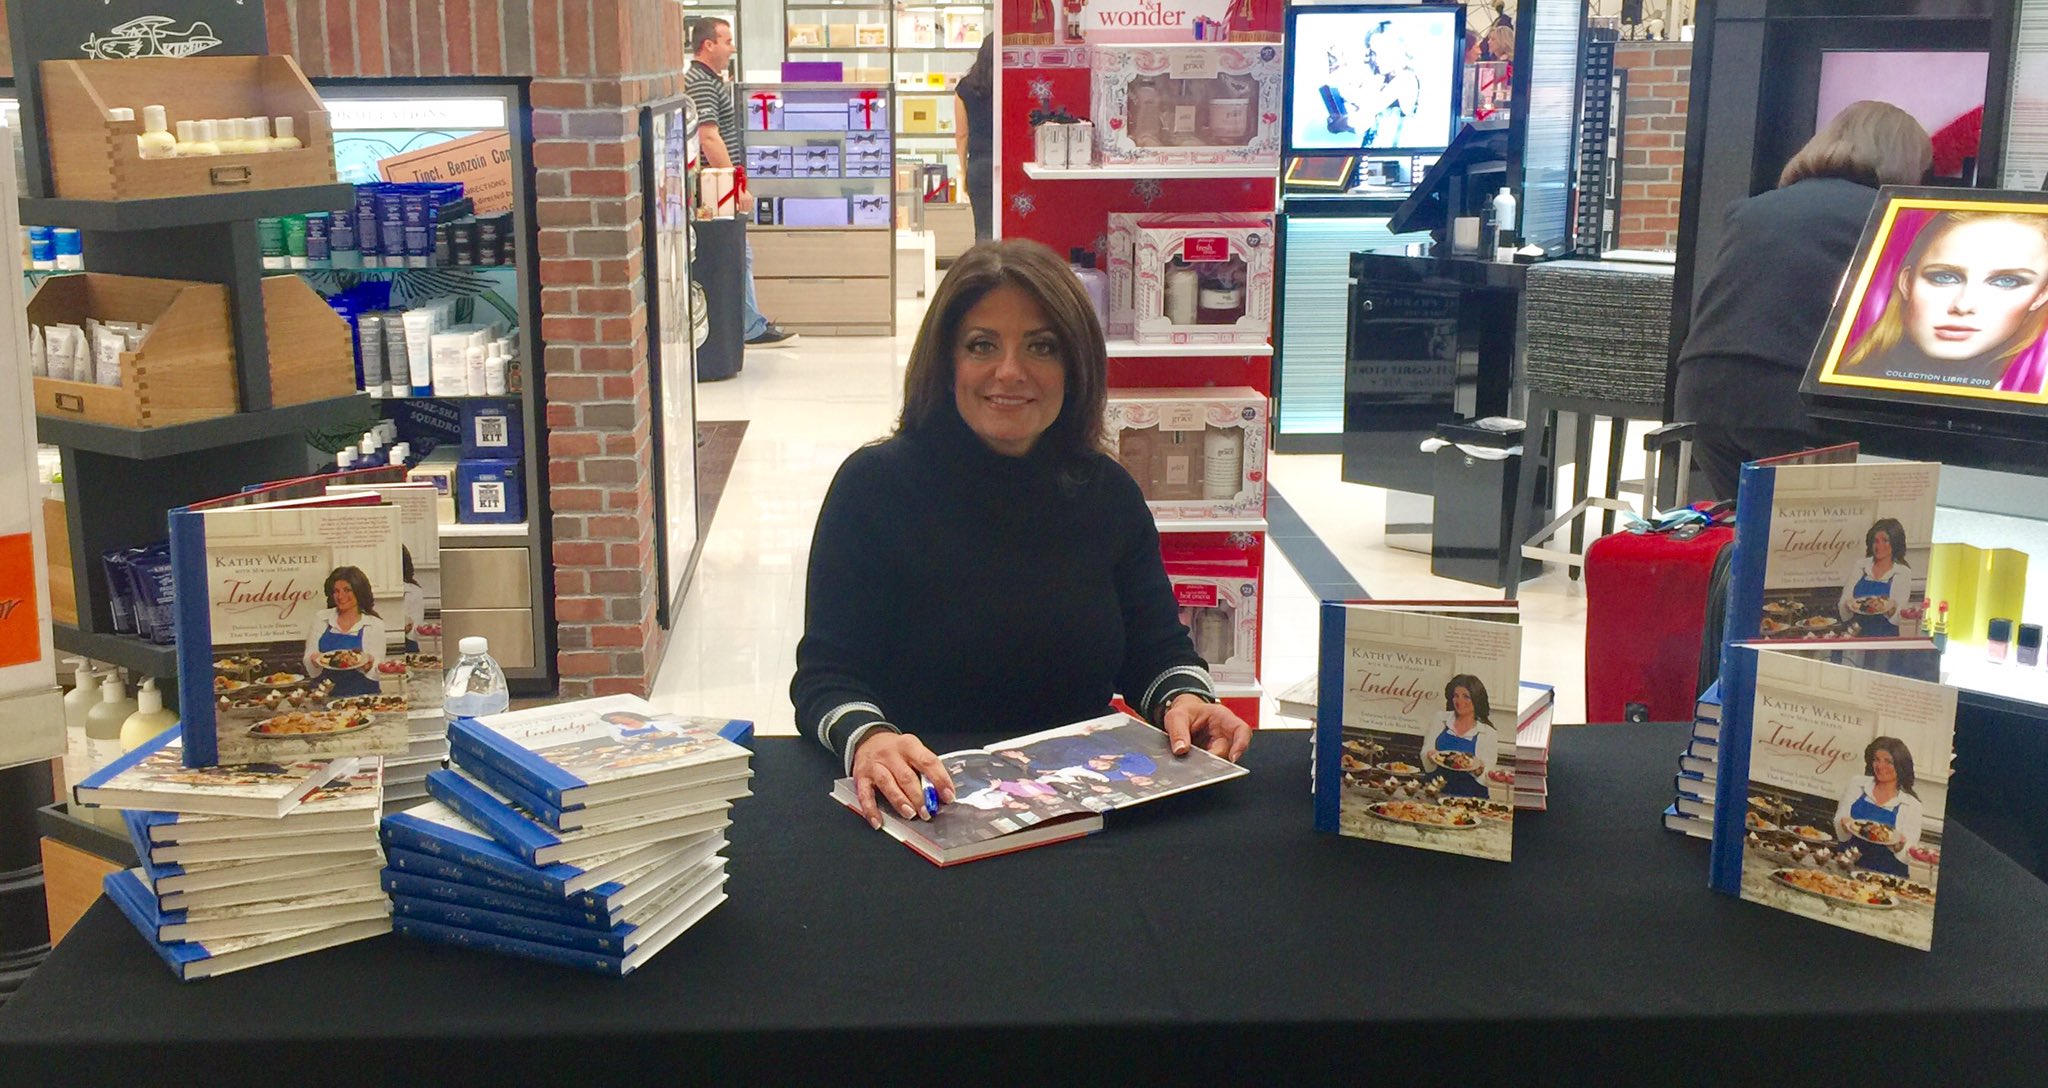 Kathy Wakile smiles at a book signing.